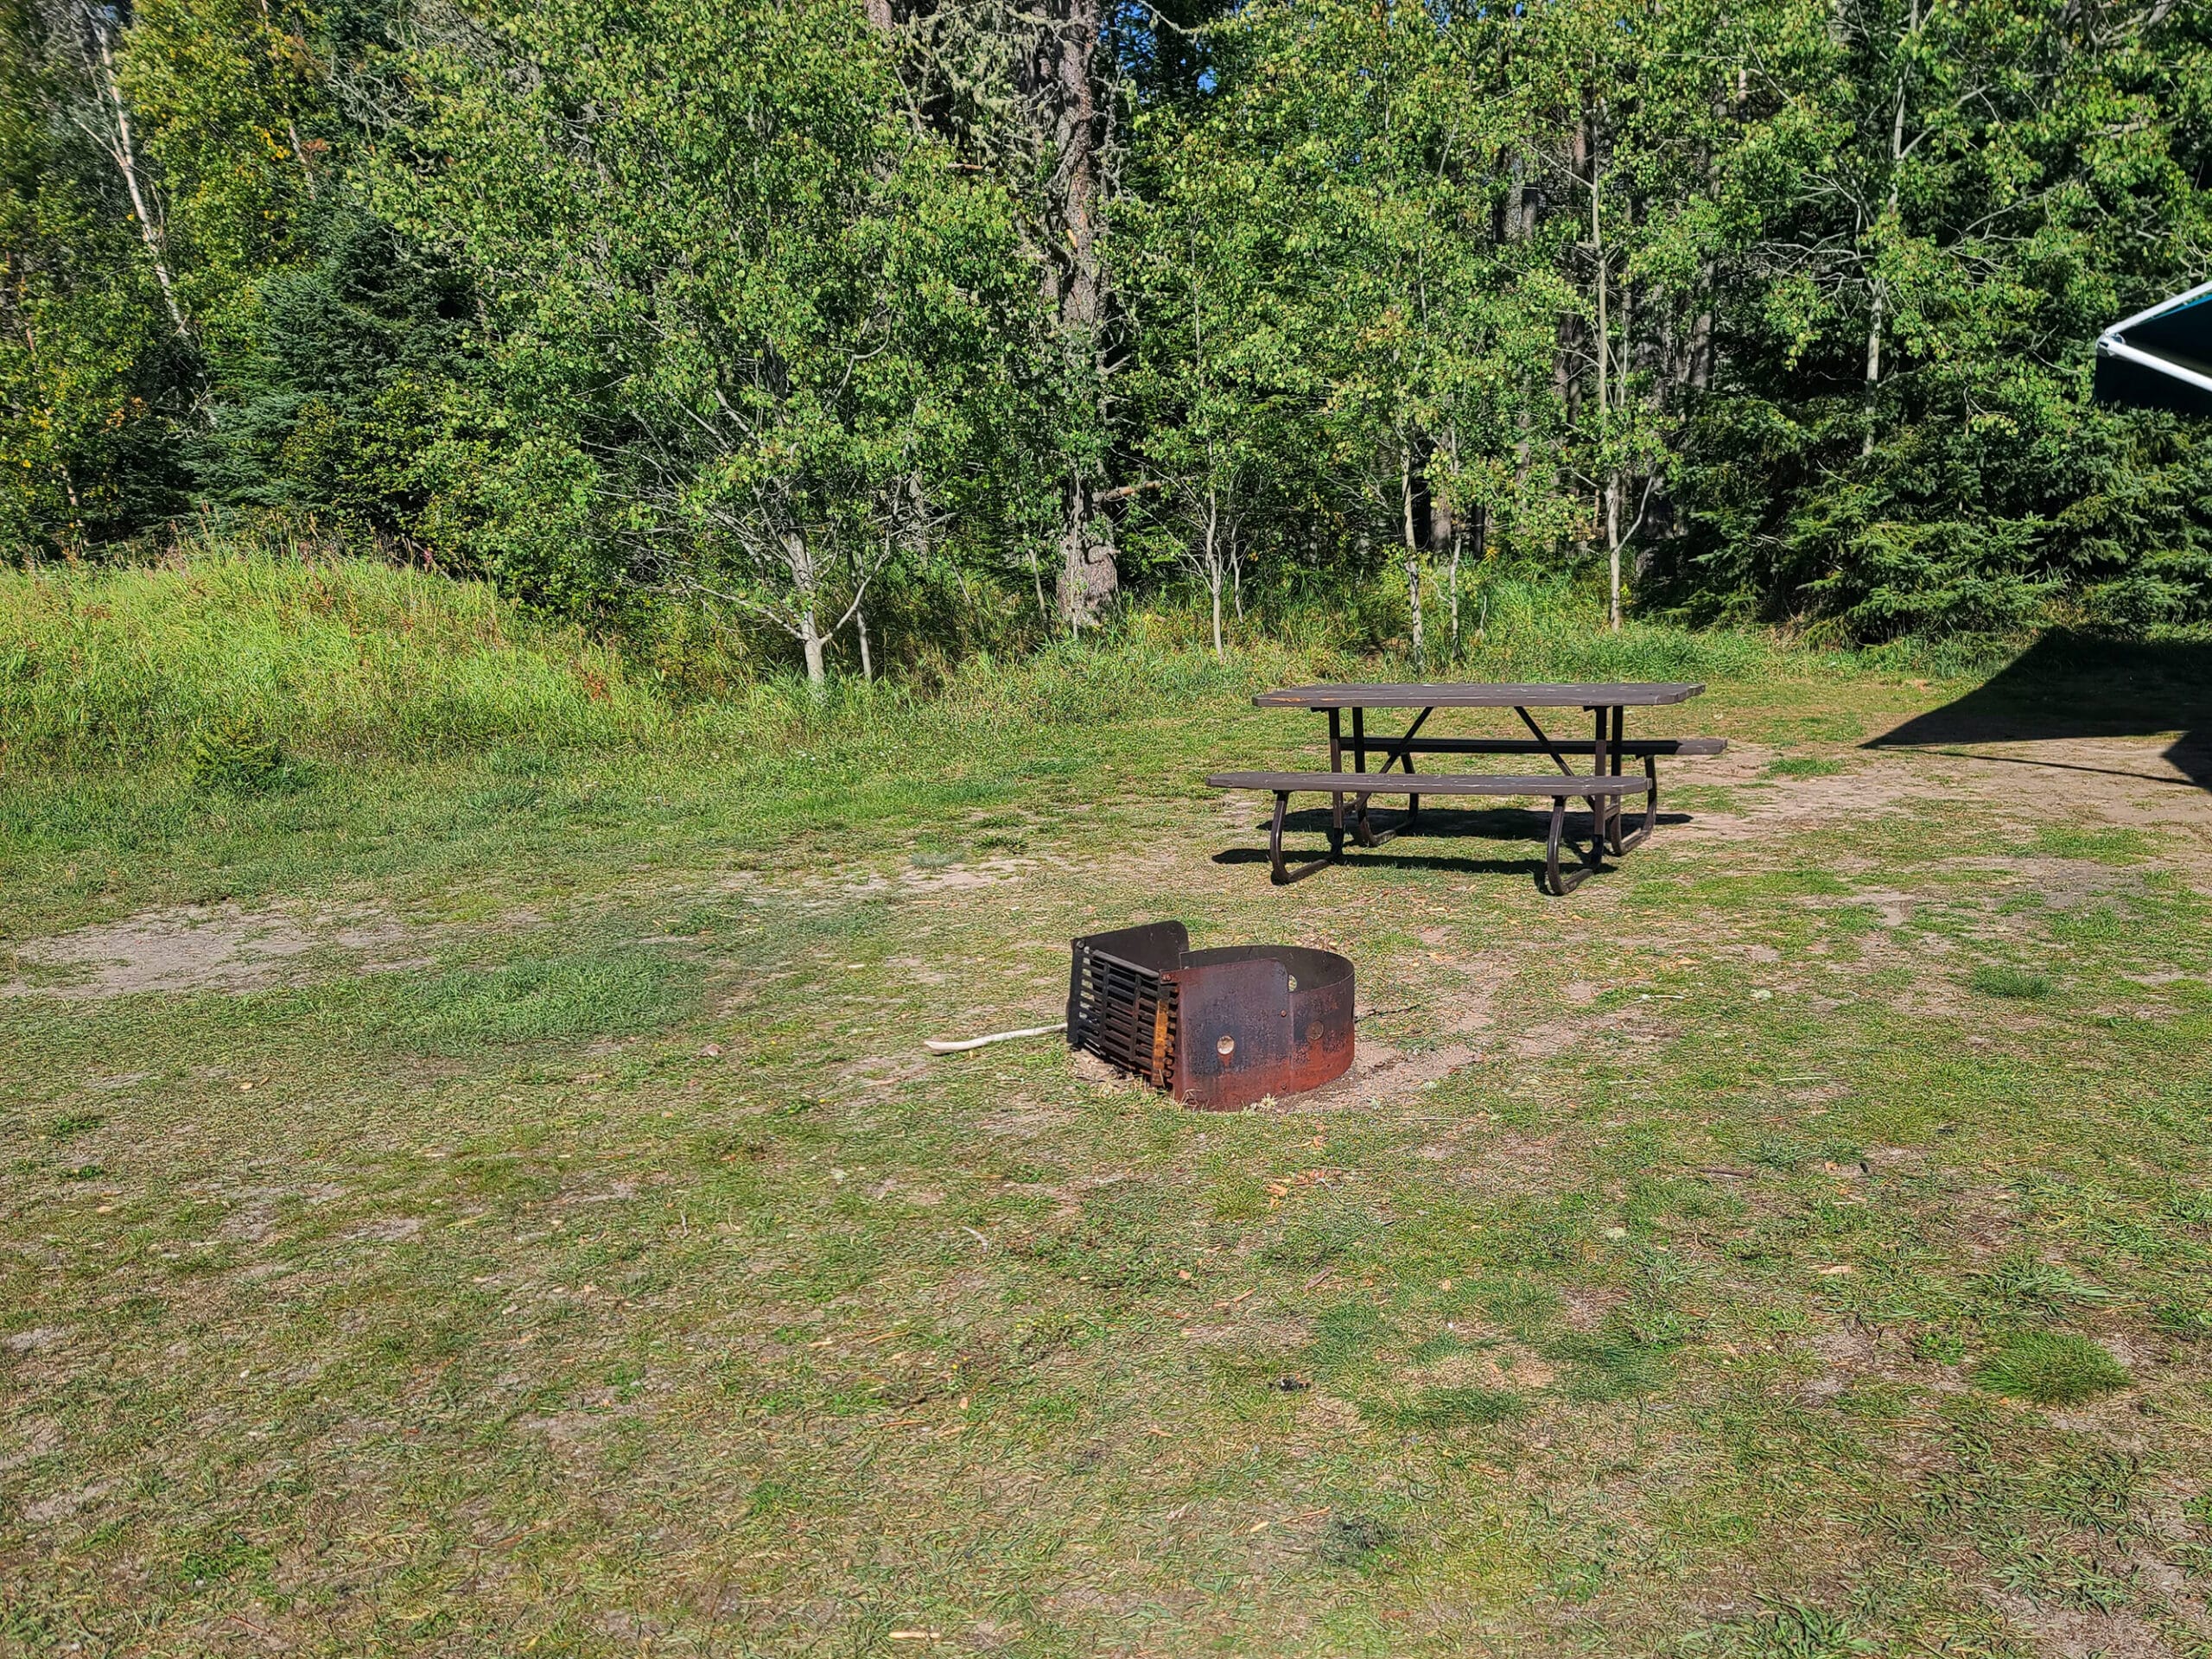 A flat grassy camp site with a picnic table and fire pit.